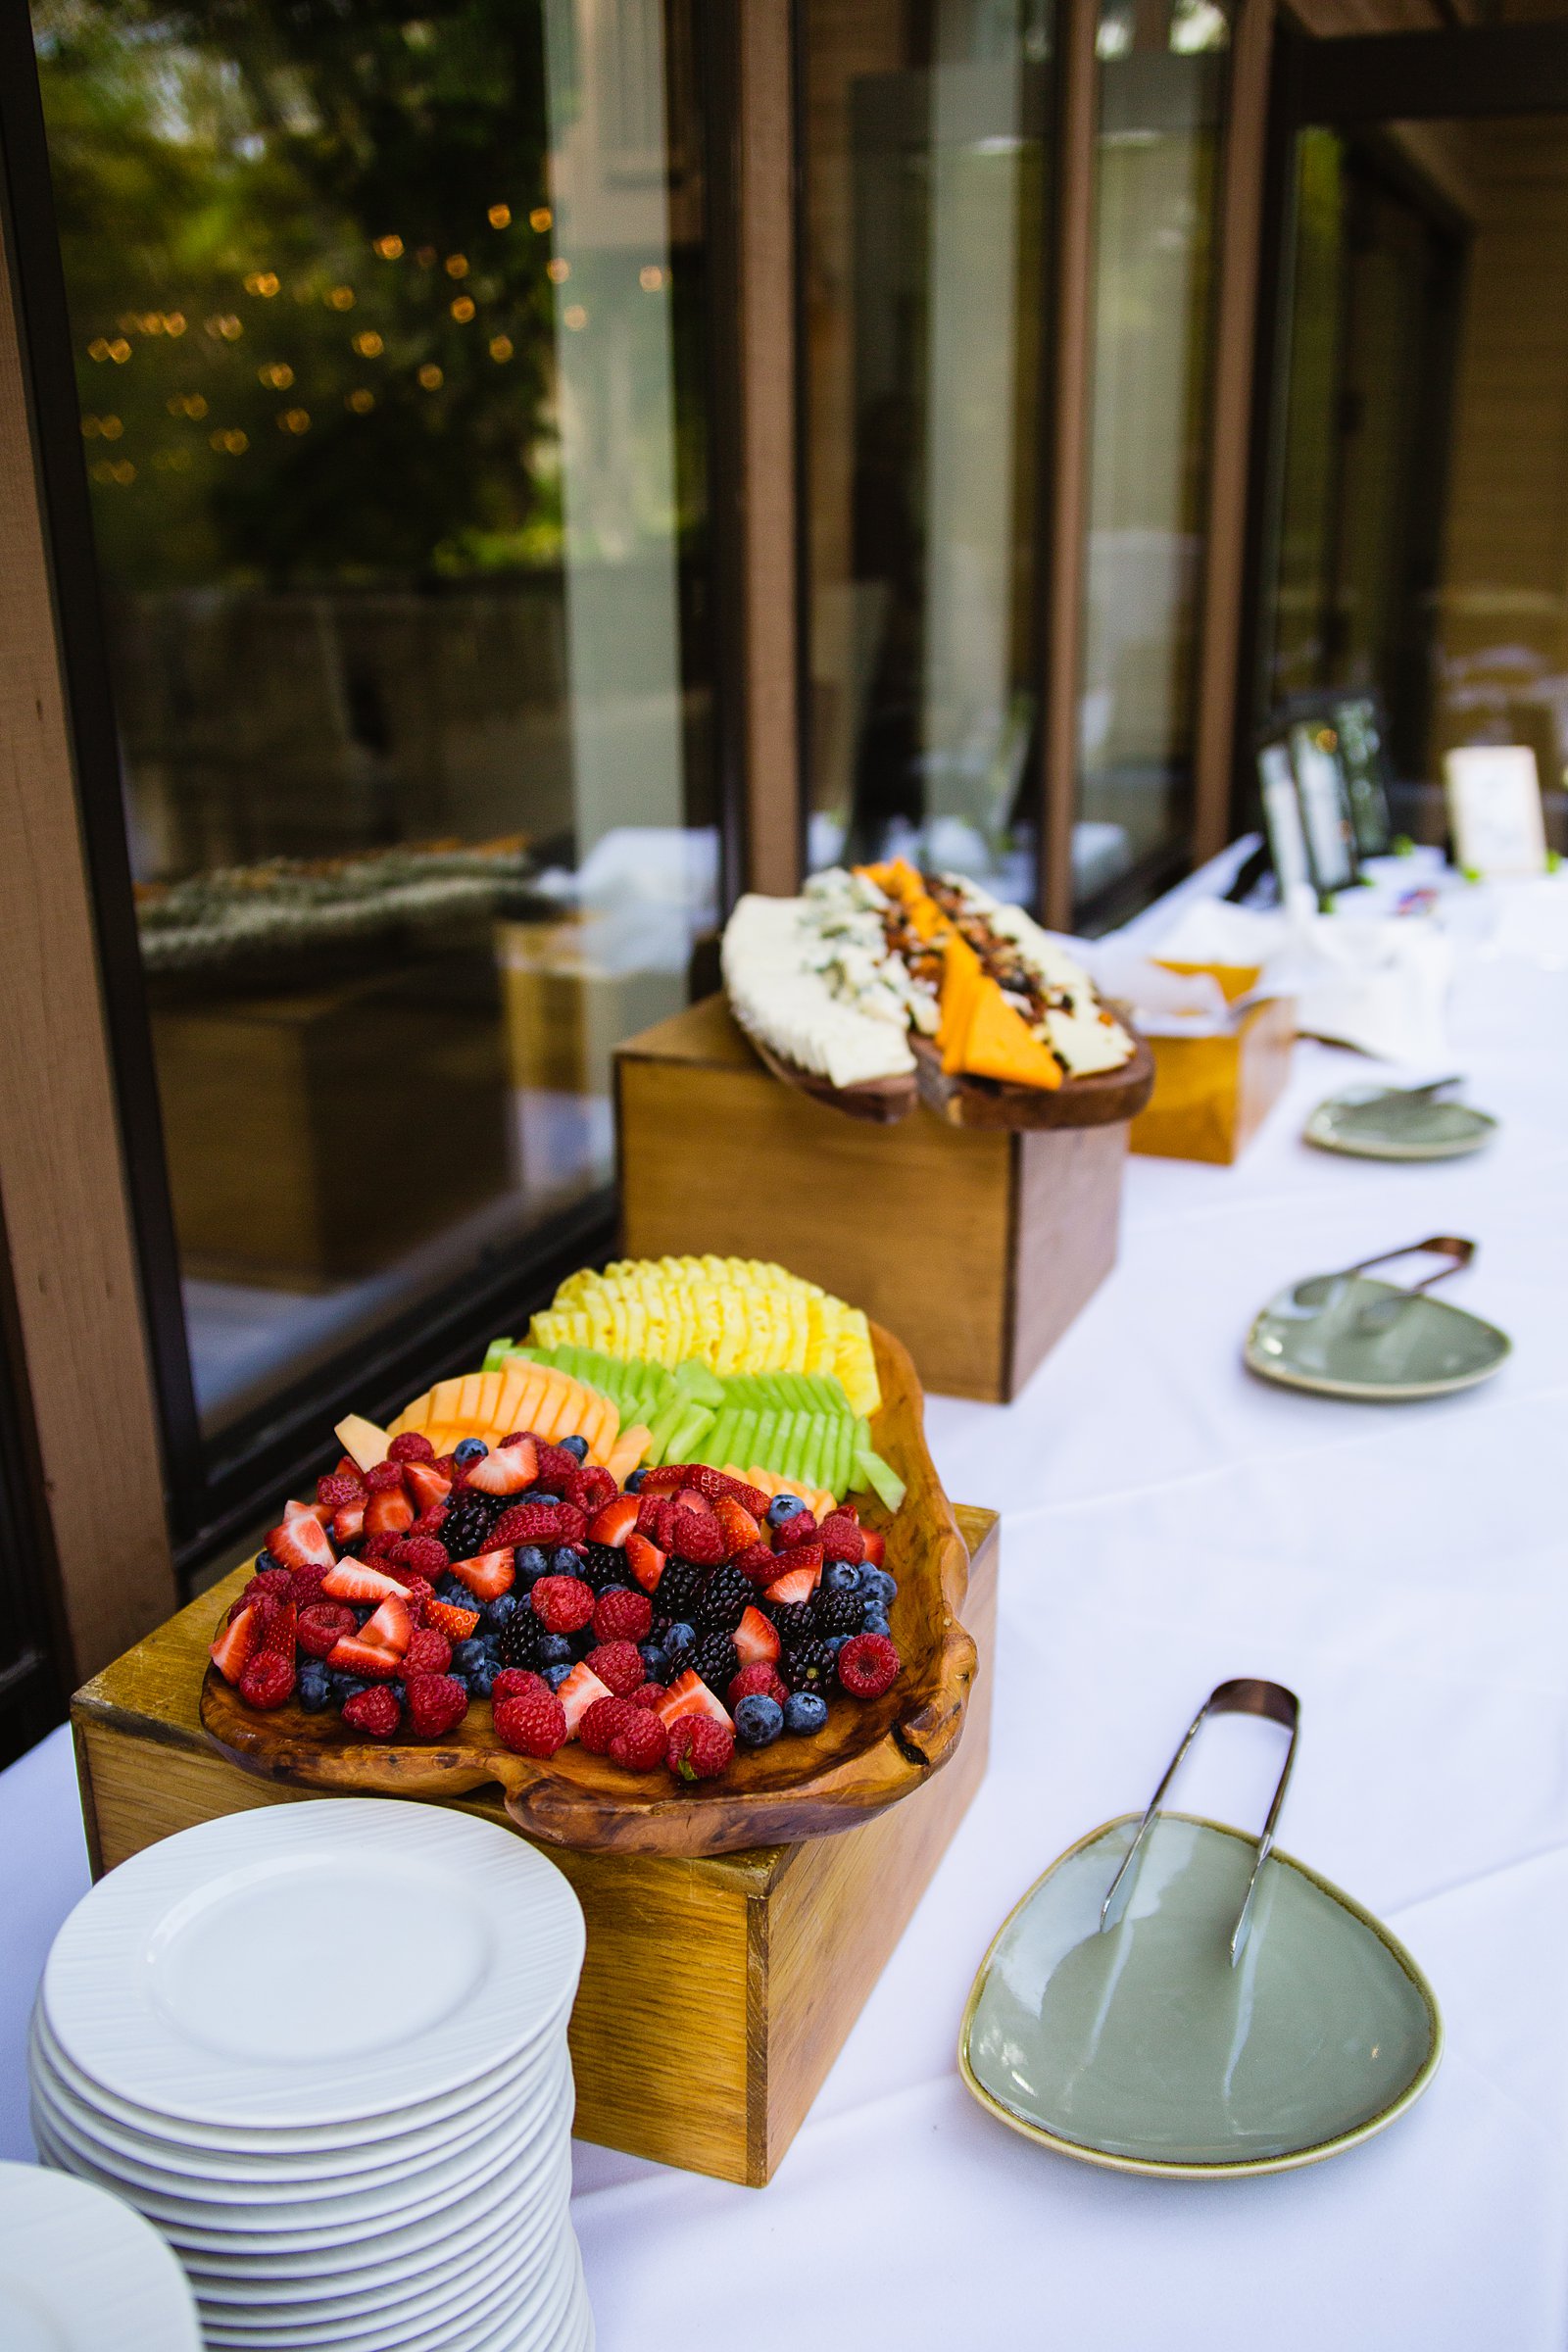 Fruit and cheese hors d'oeuvres at for a DIY wedding crafting party by PMA Photography